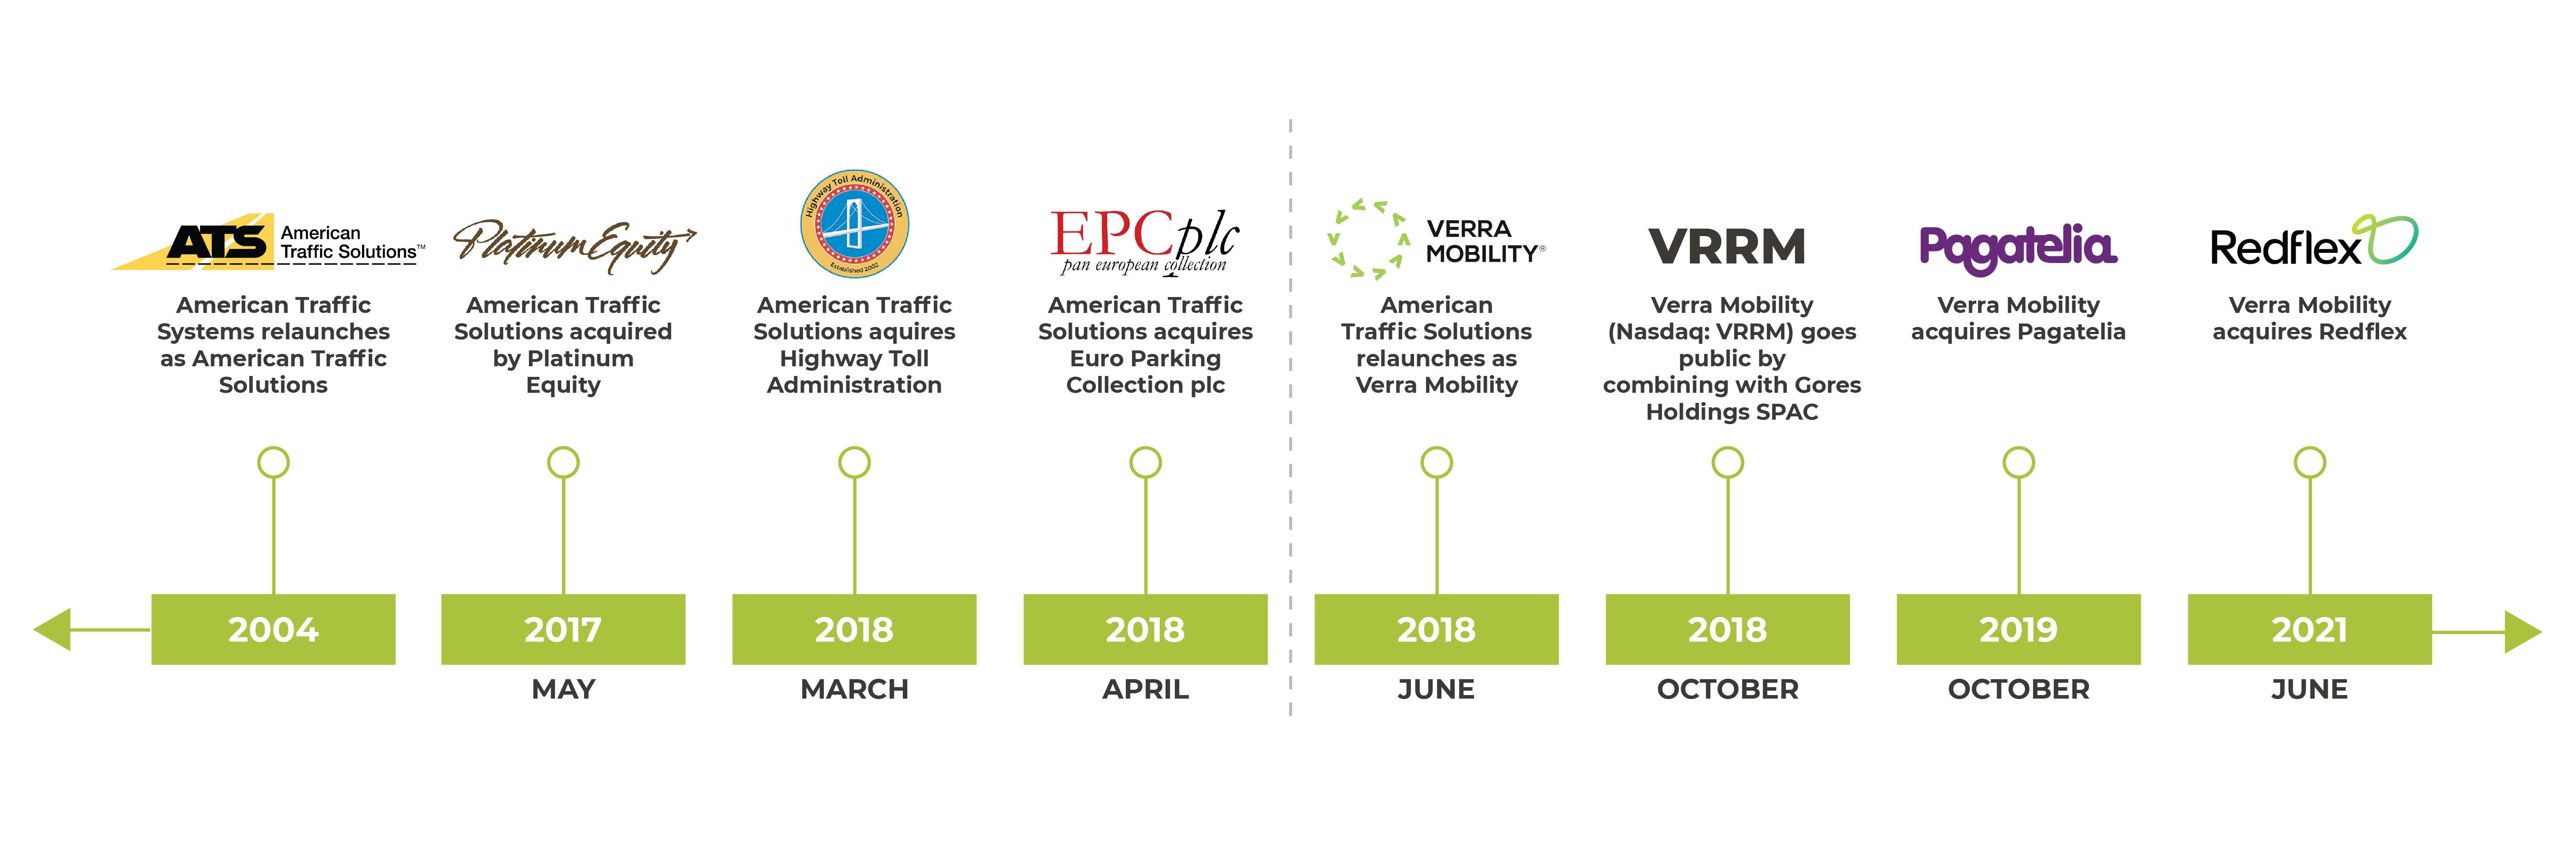 Timeline of Verra Mobility from 2004 through 2021